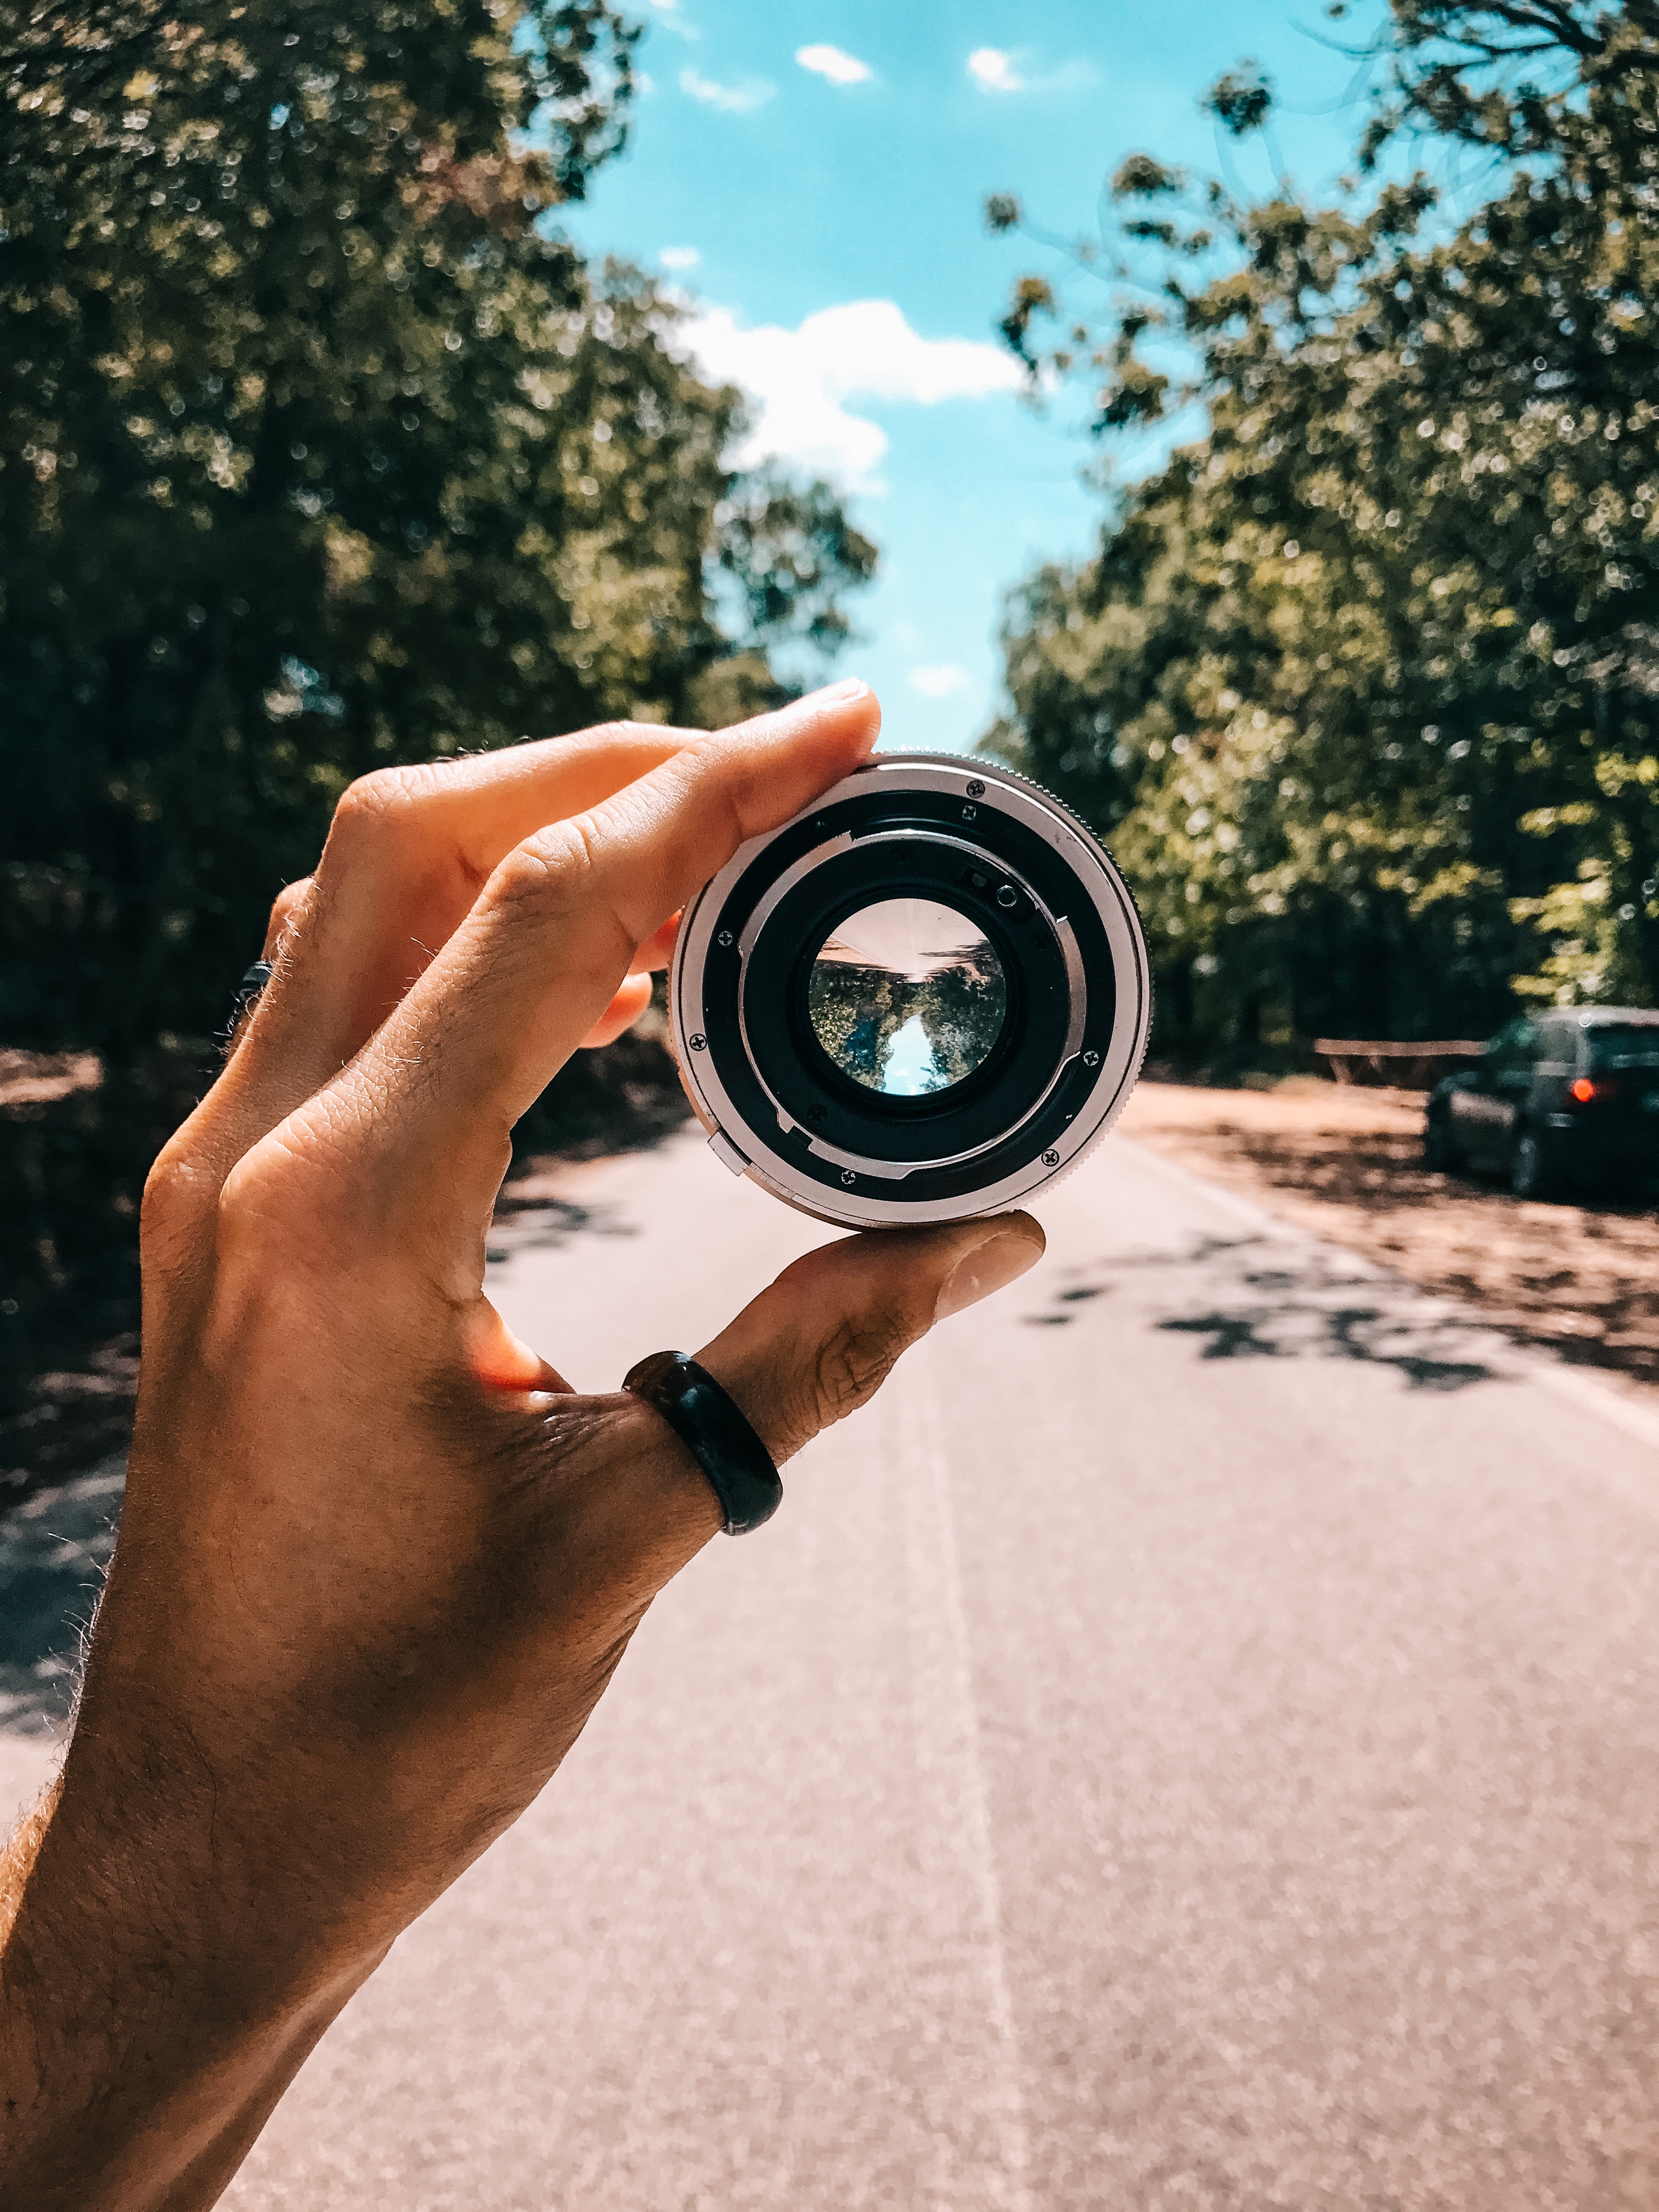 Person holding camera lens in the middle of street under blue sky photo